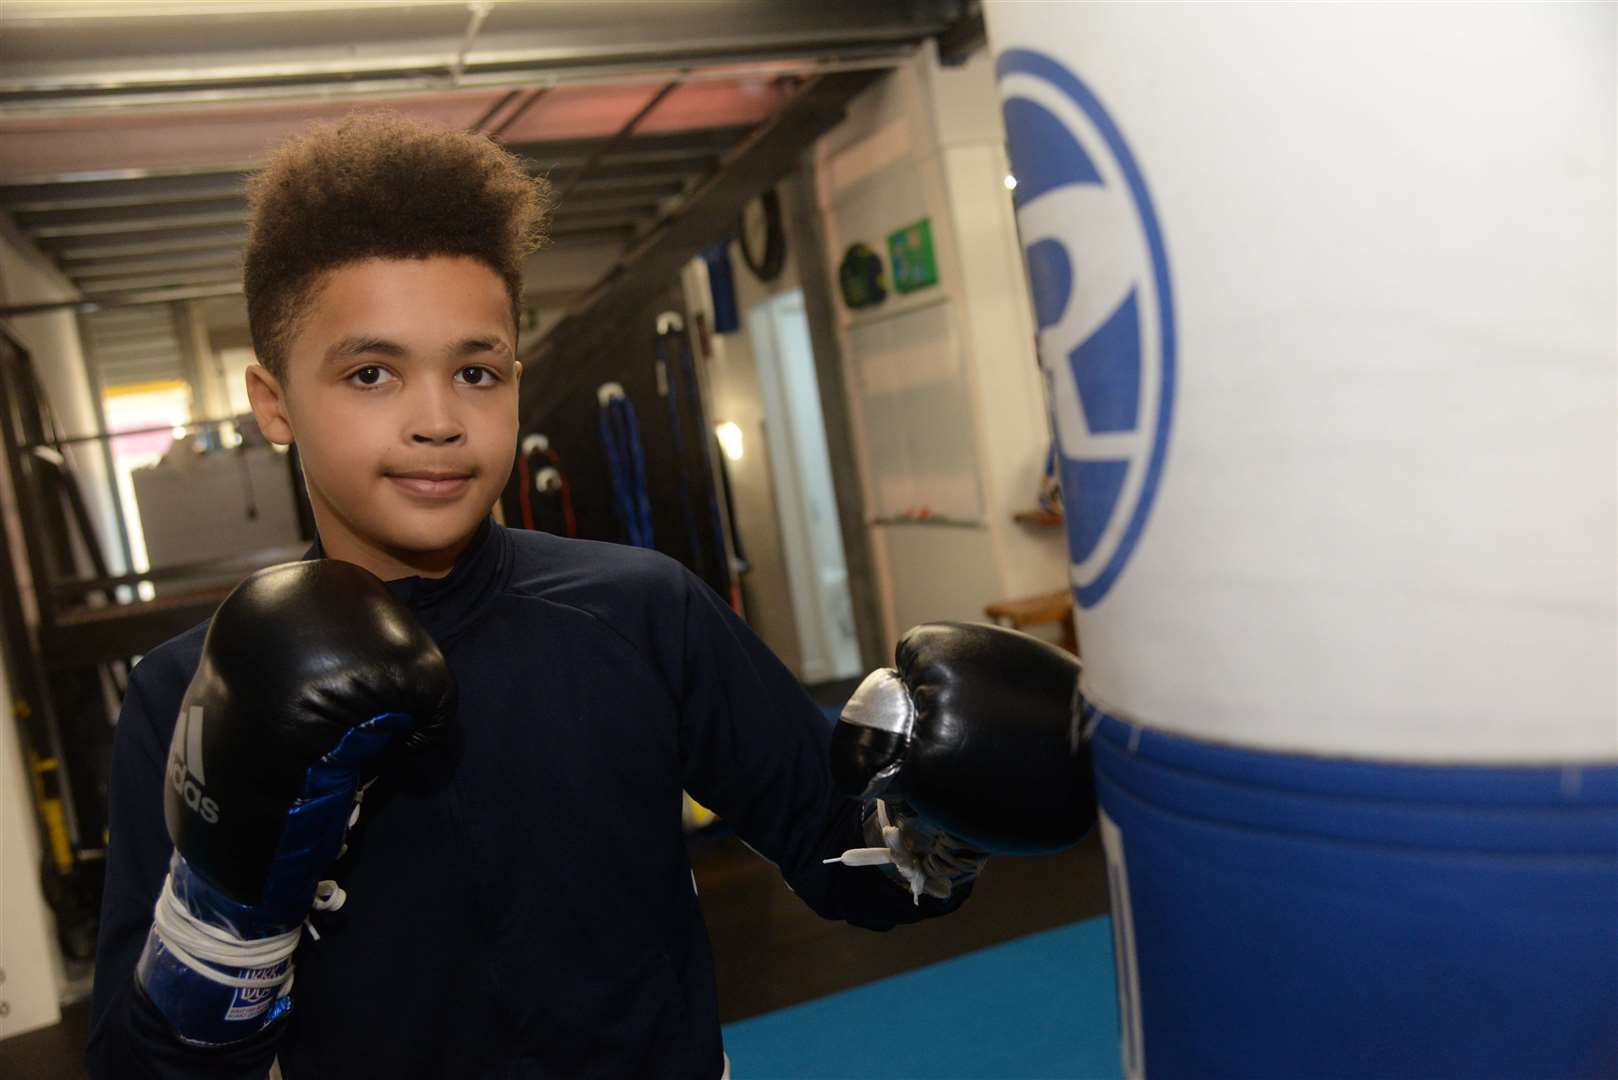 Kye Didloff-Lacy, 13 who is taking part in an anti-knife campaign. Picture: Chris Davey.